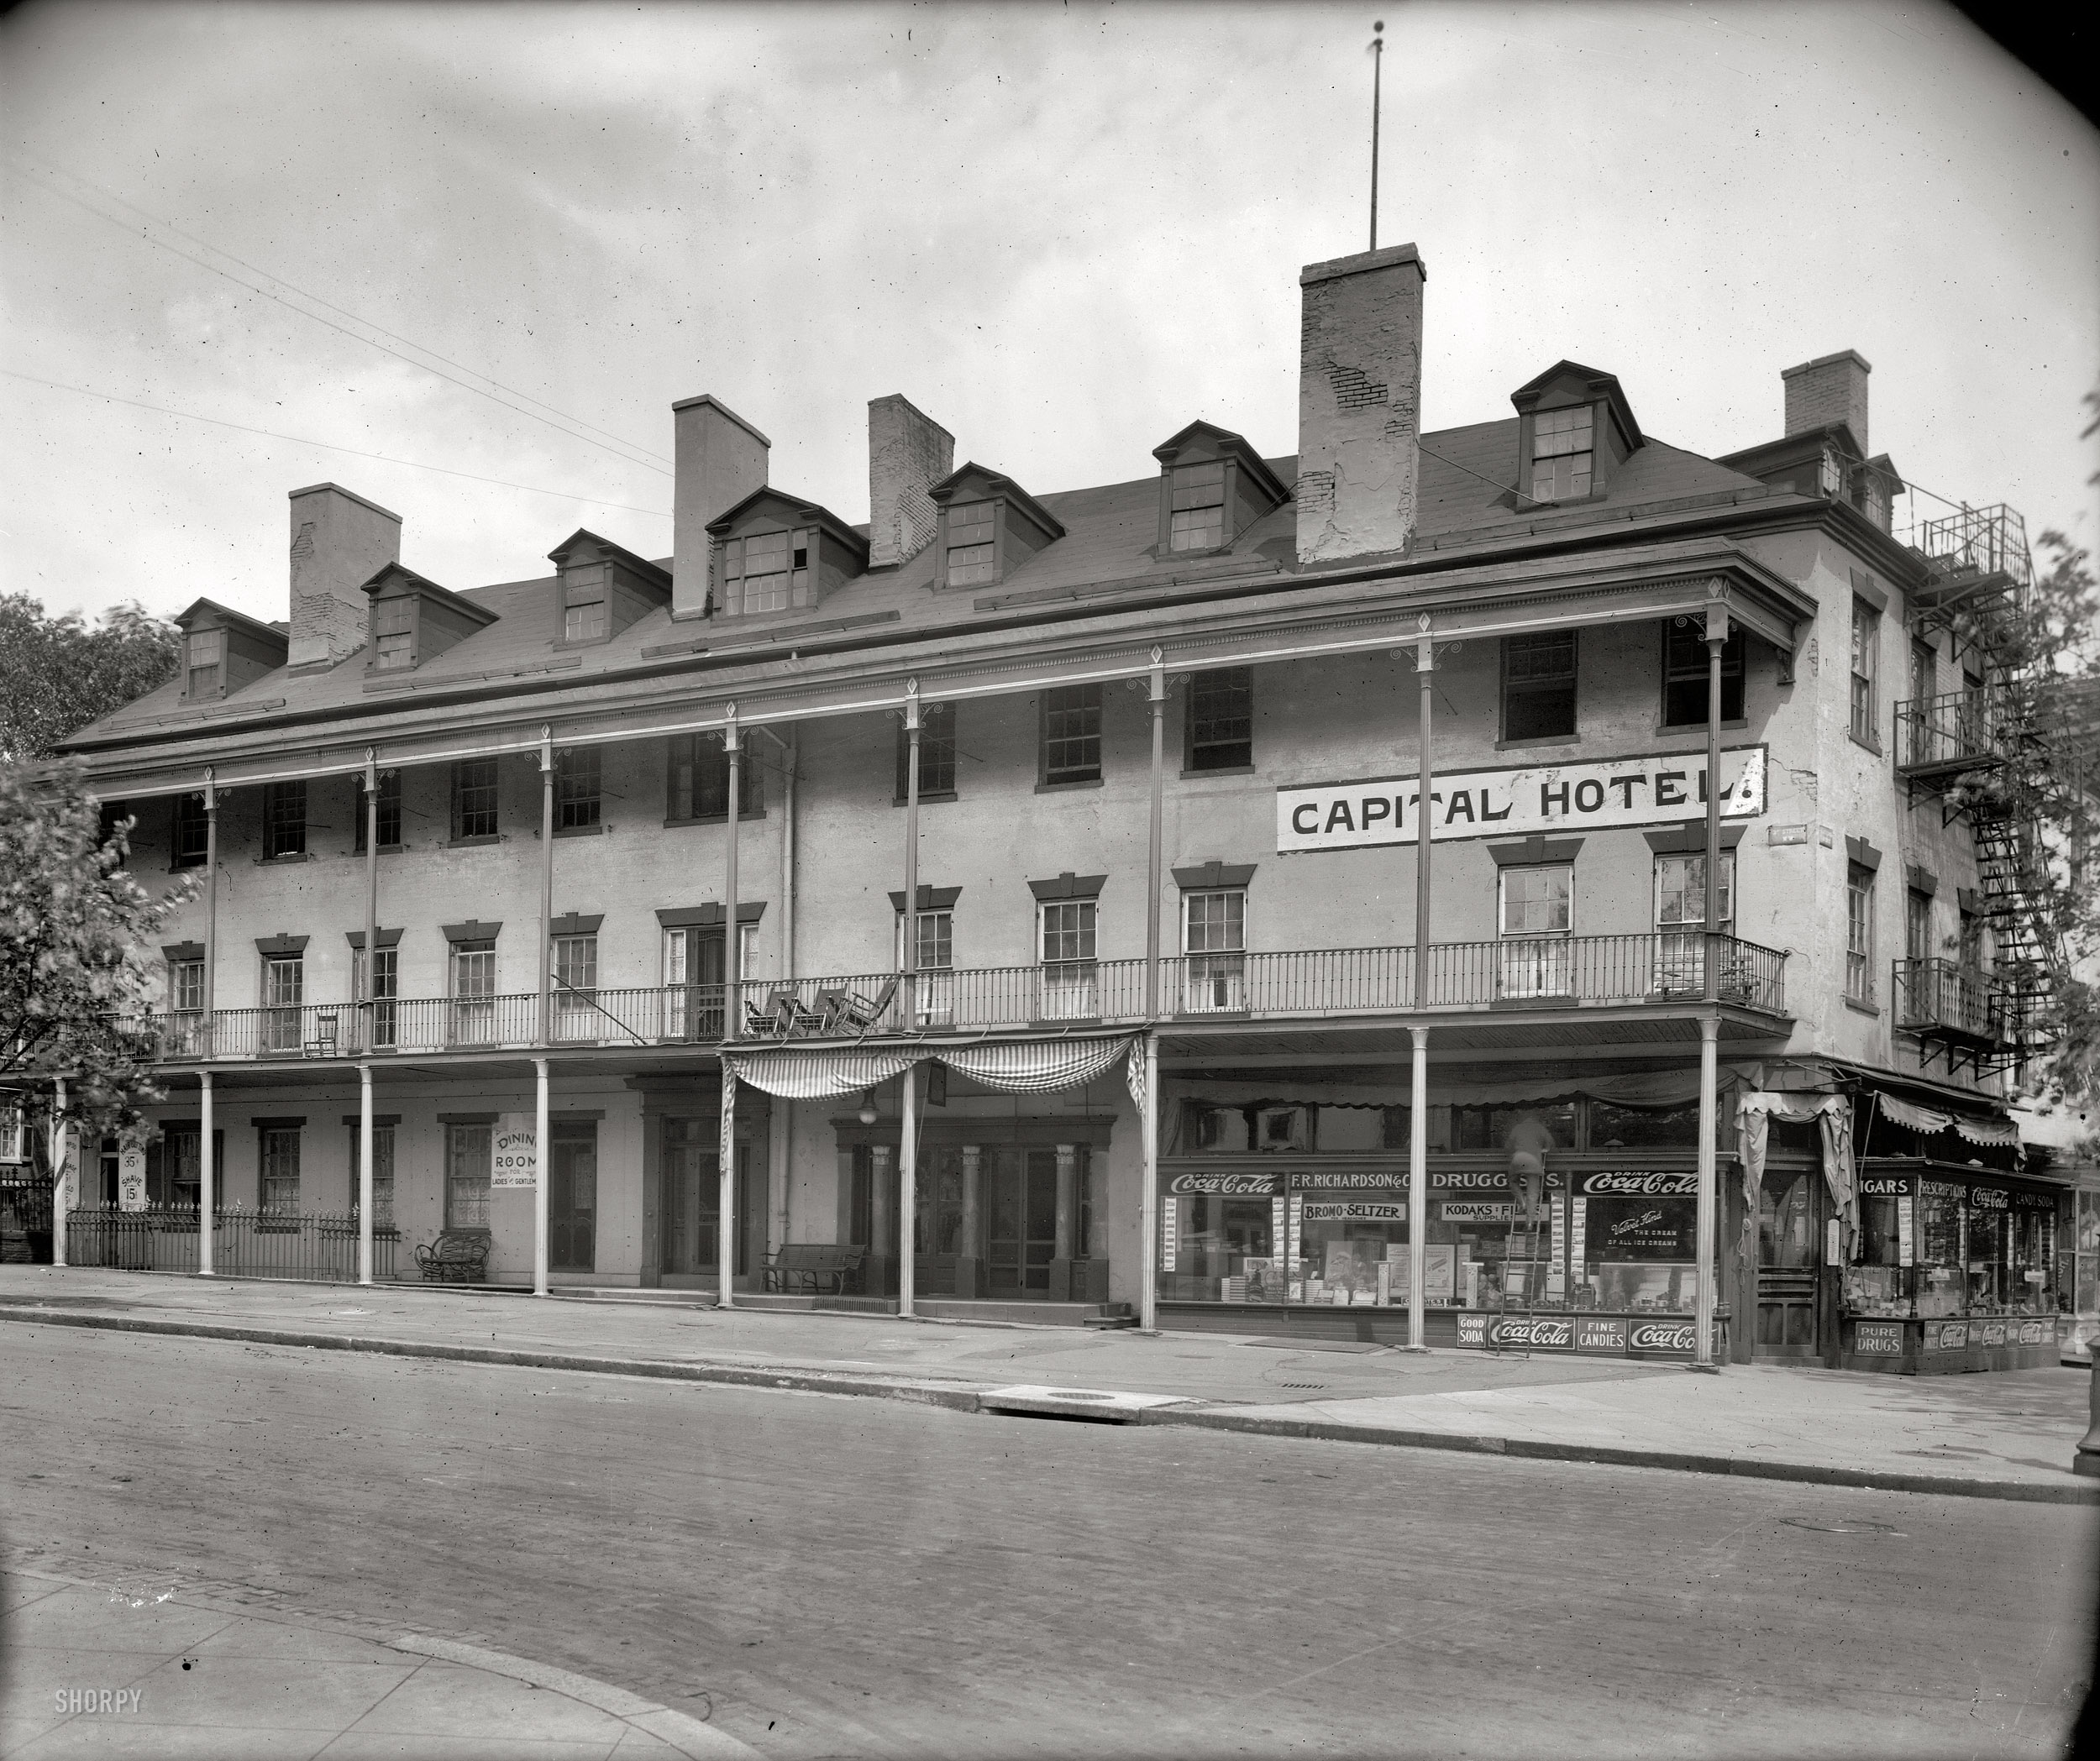 Washington, D.C., circa 1920. "Old Capital Hotel, 3rd and Pennsylvania N.W." When the place was torn down in 1926, the sign had changed from "Capital" to "Capitol." Originally the St. Charles Hotel, it had a colorful (at times appalling) history going back to 1813. National Photo Co. glass negative. View full size.